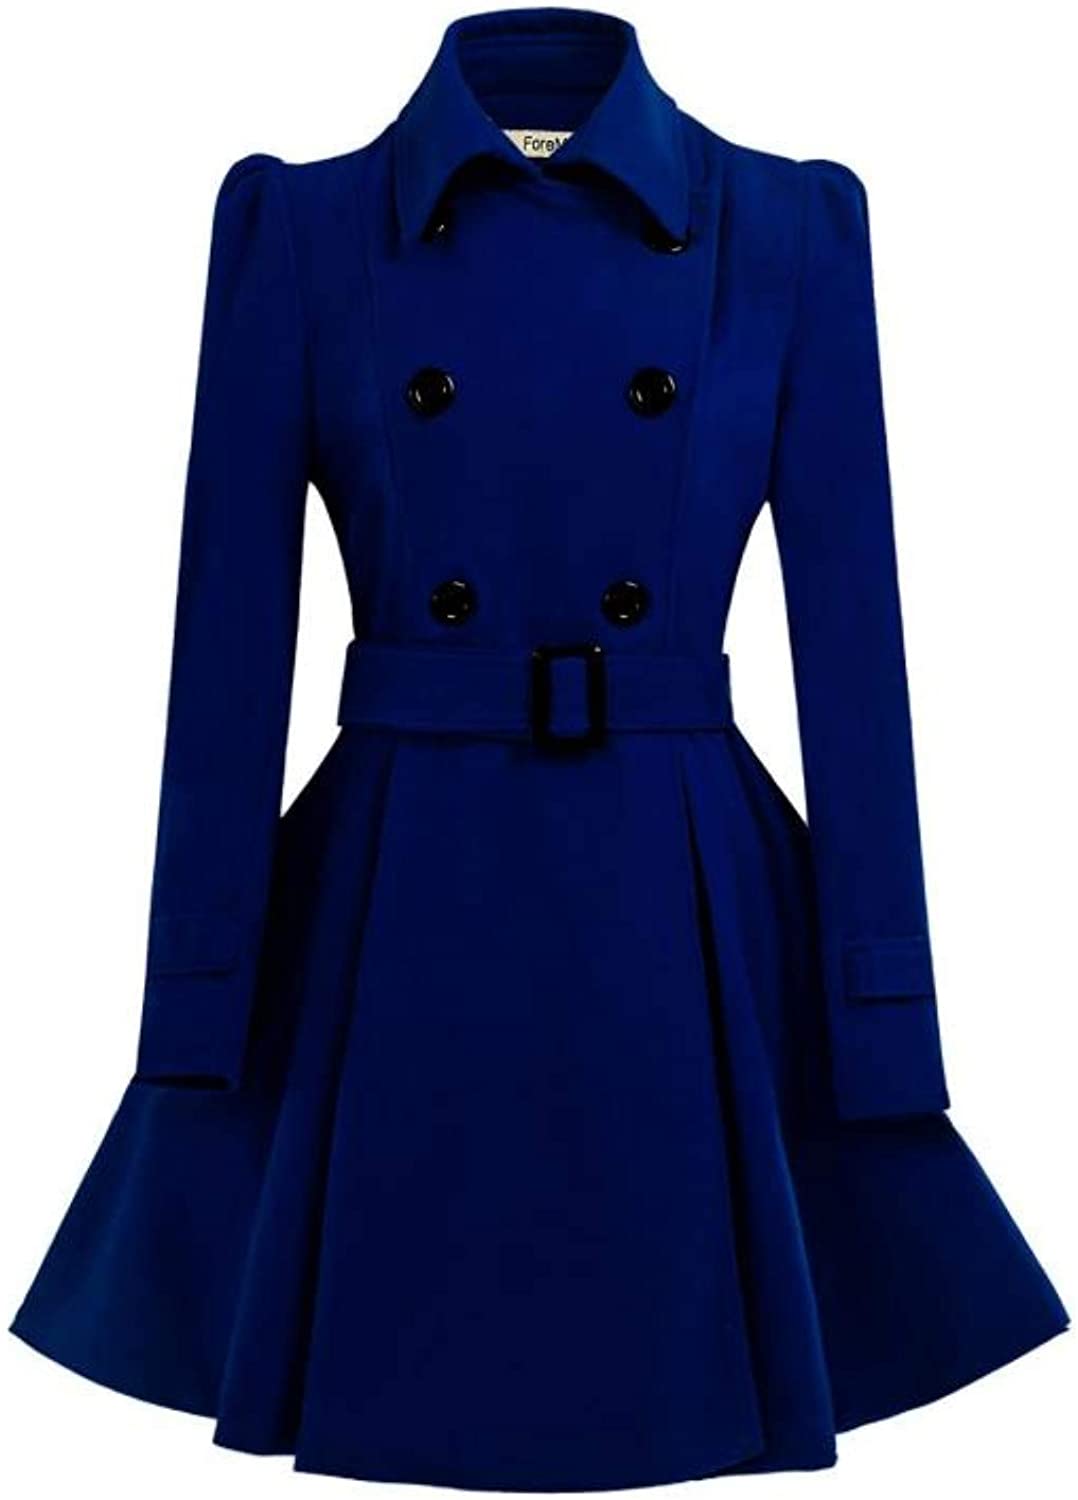 ForeMode Women Double-breasted Trench Coat Dress Jacket